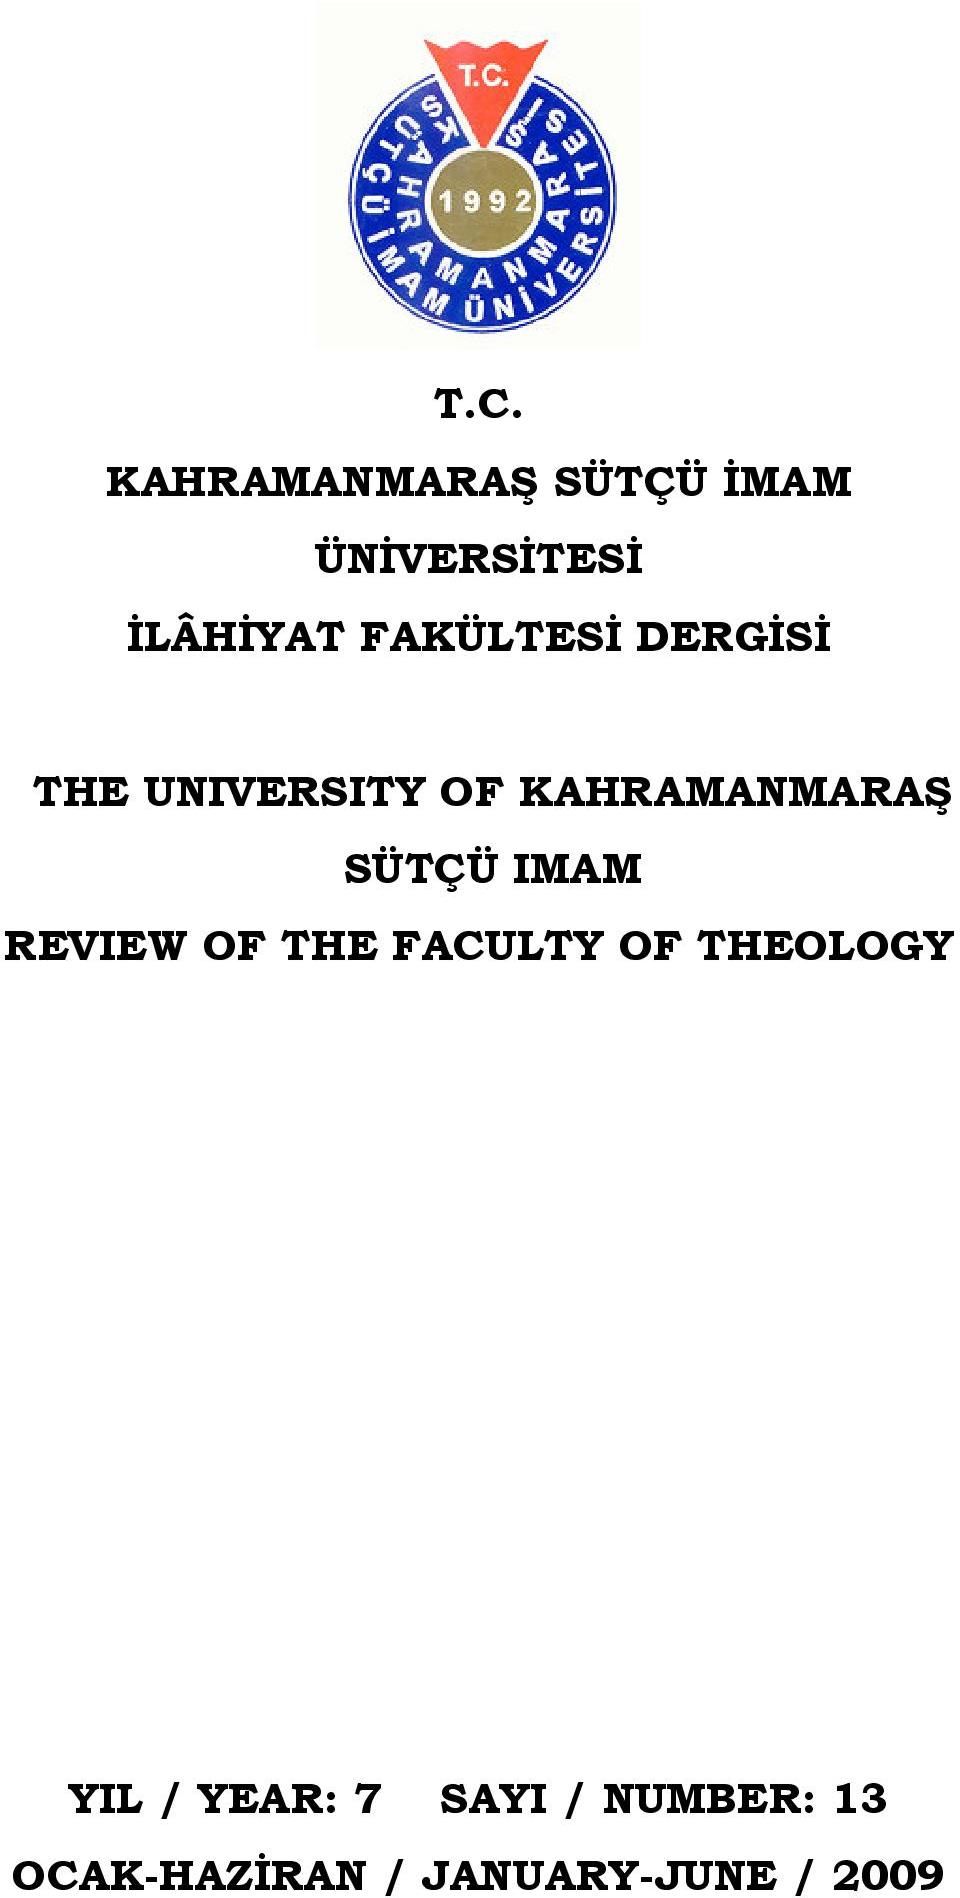 SÜTÇÜ IMAM REVIEW OF THE FACULTY OF THEOLOGY YIL /